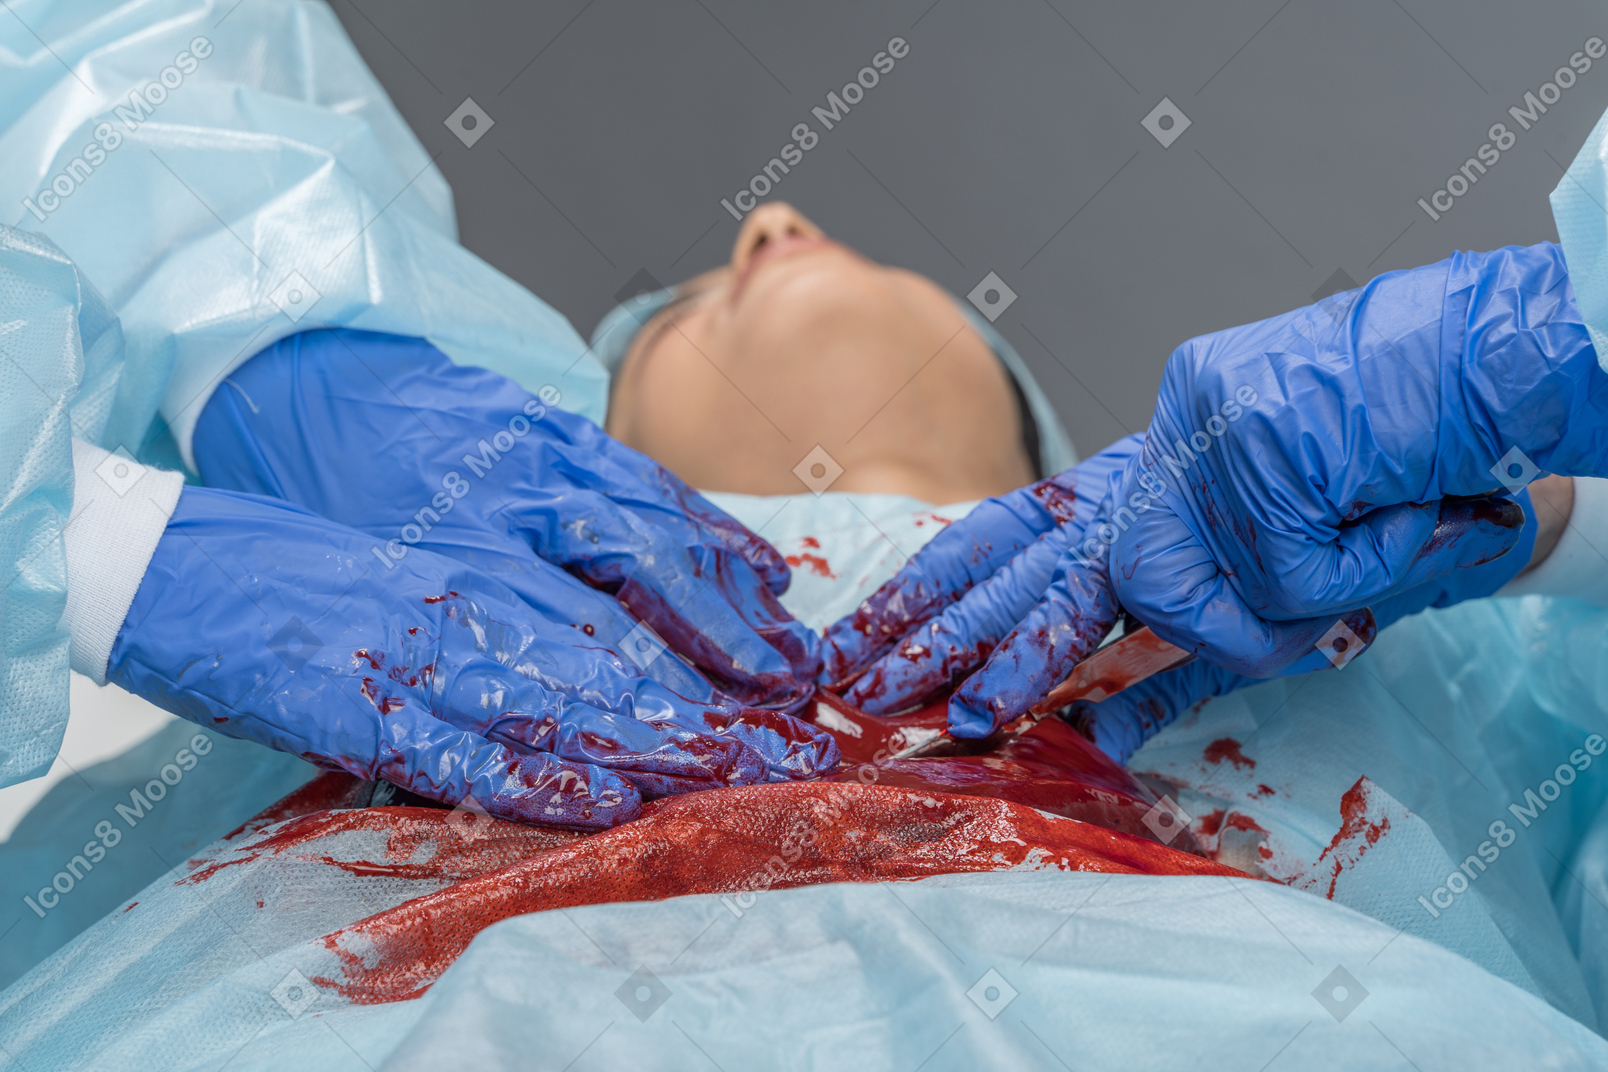 Young woman under anesthesia while being operated